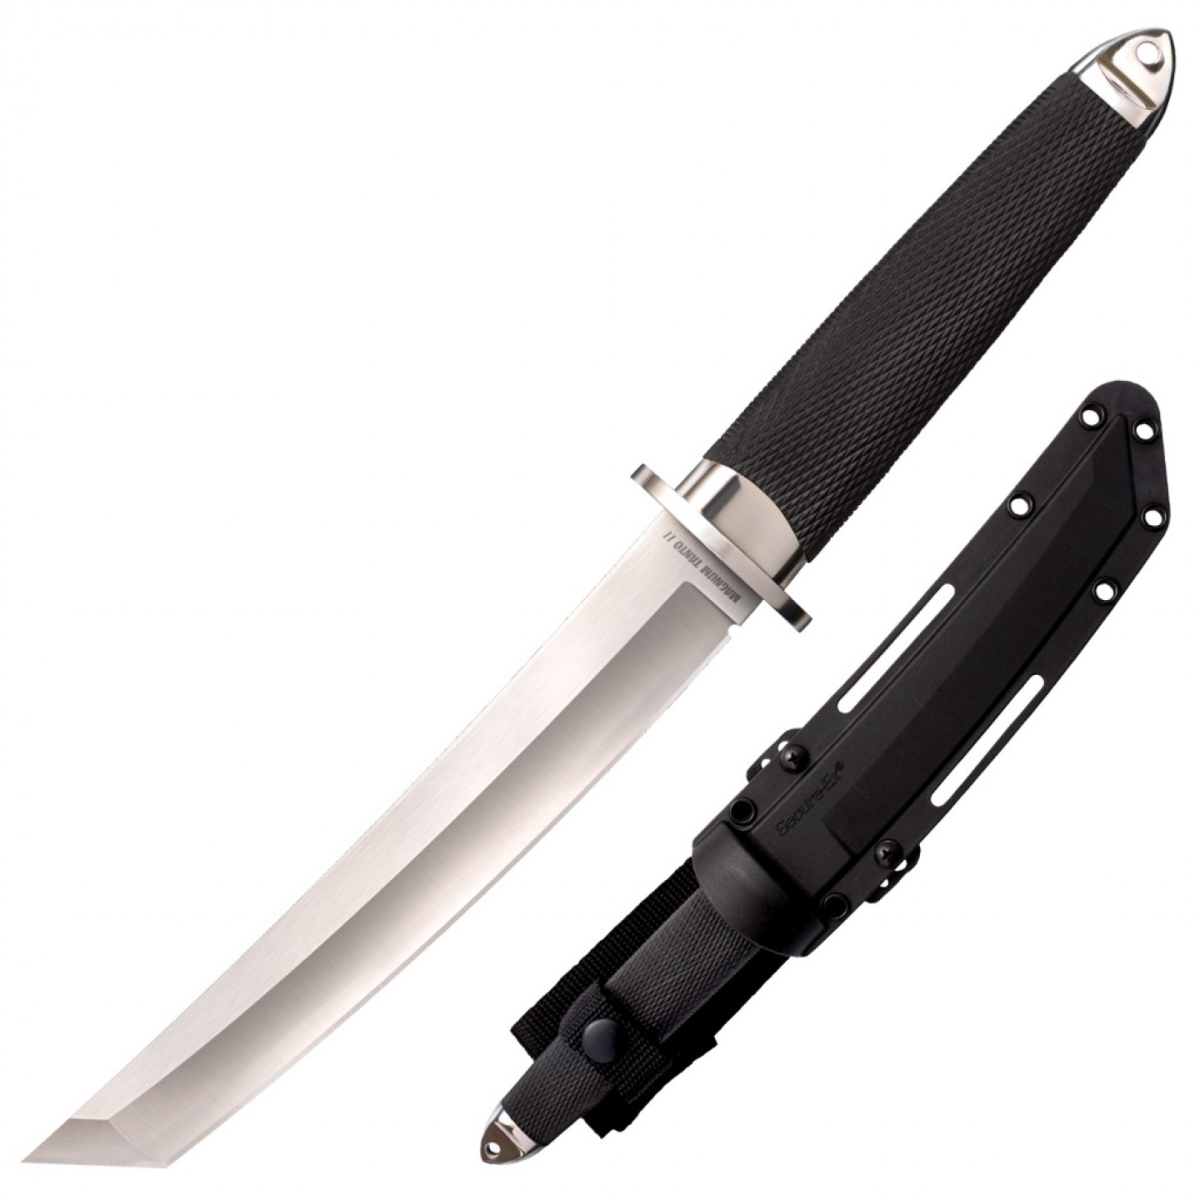 CLD-35AC 2019 Vg-10 San Mai Steel Magnum Tanto II Fixed Knife with Long Kray Ex Handles - 5.62 in.